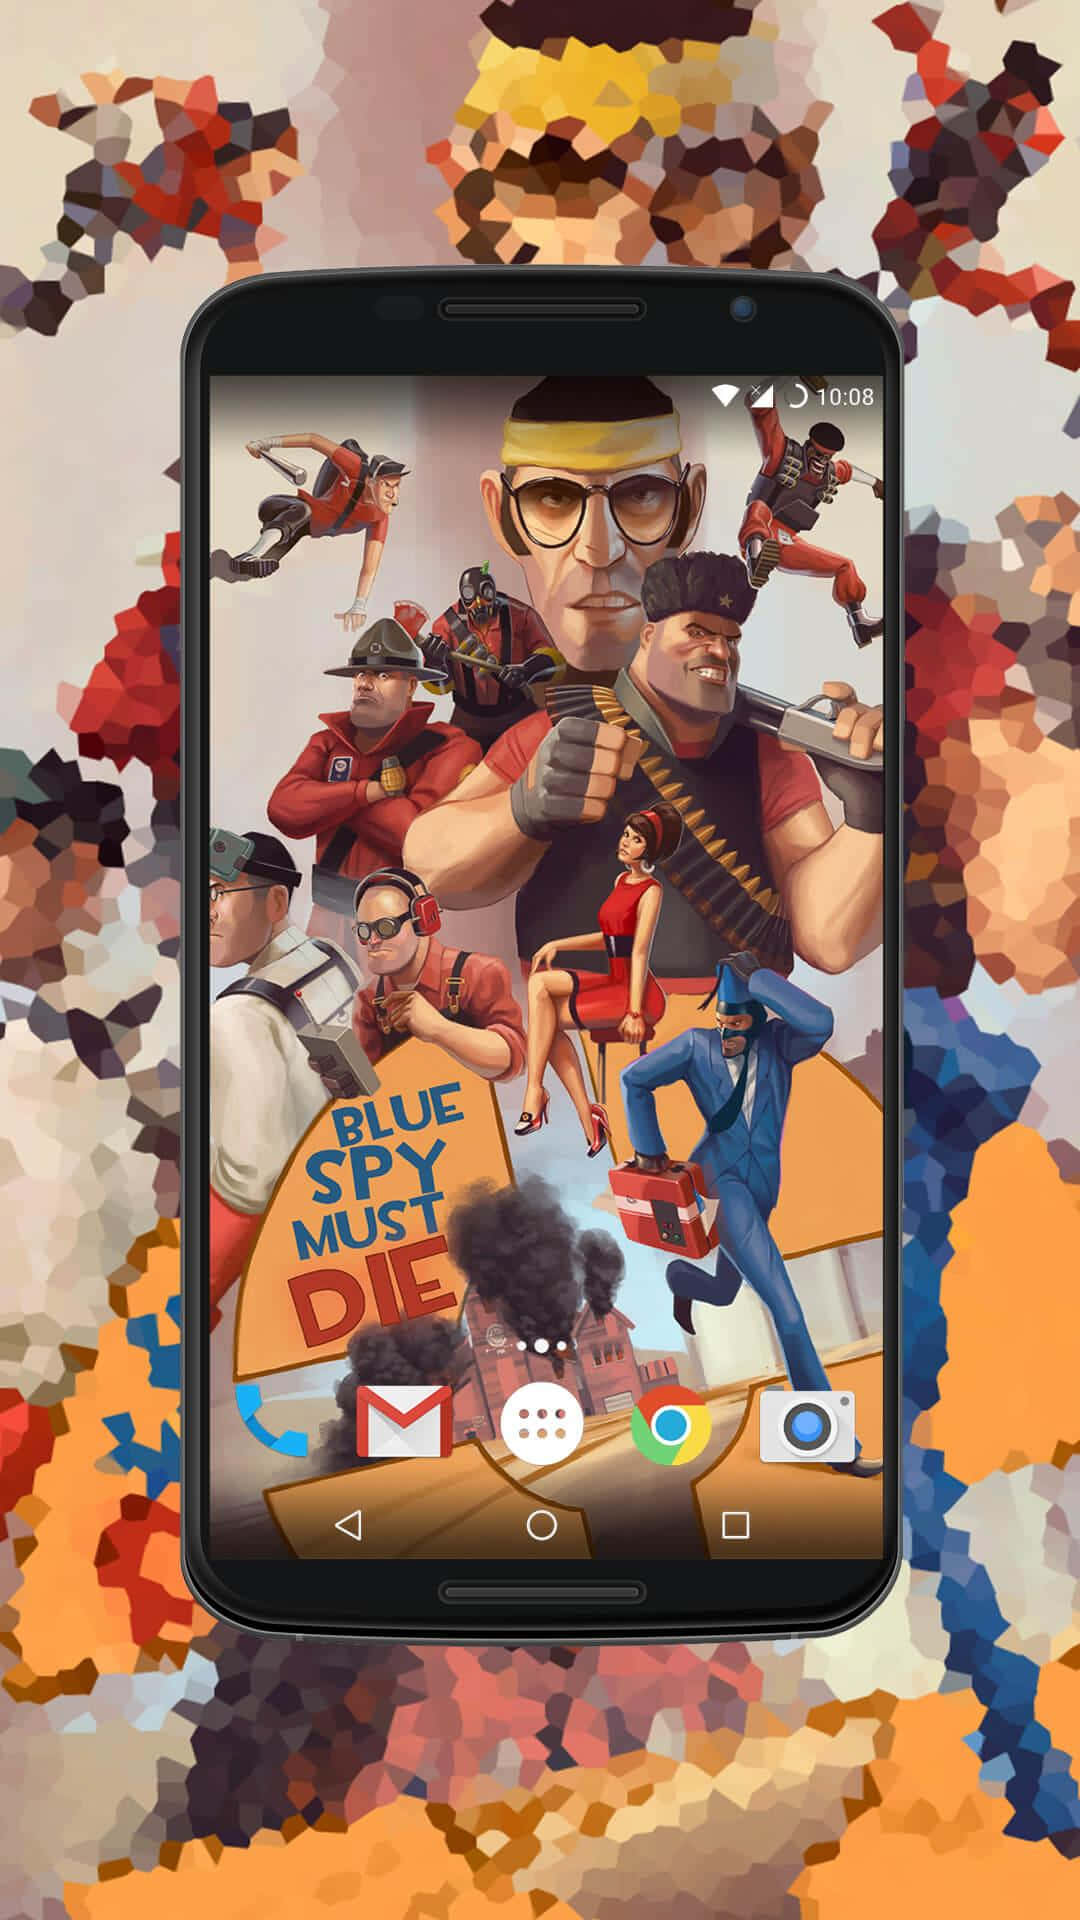 Pixel 3XL Display with Team Fortress 2 Game Background